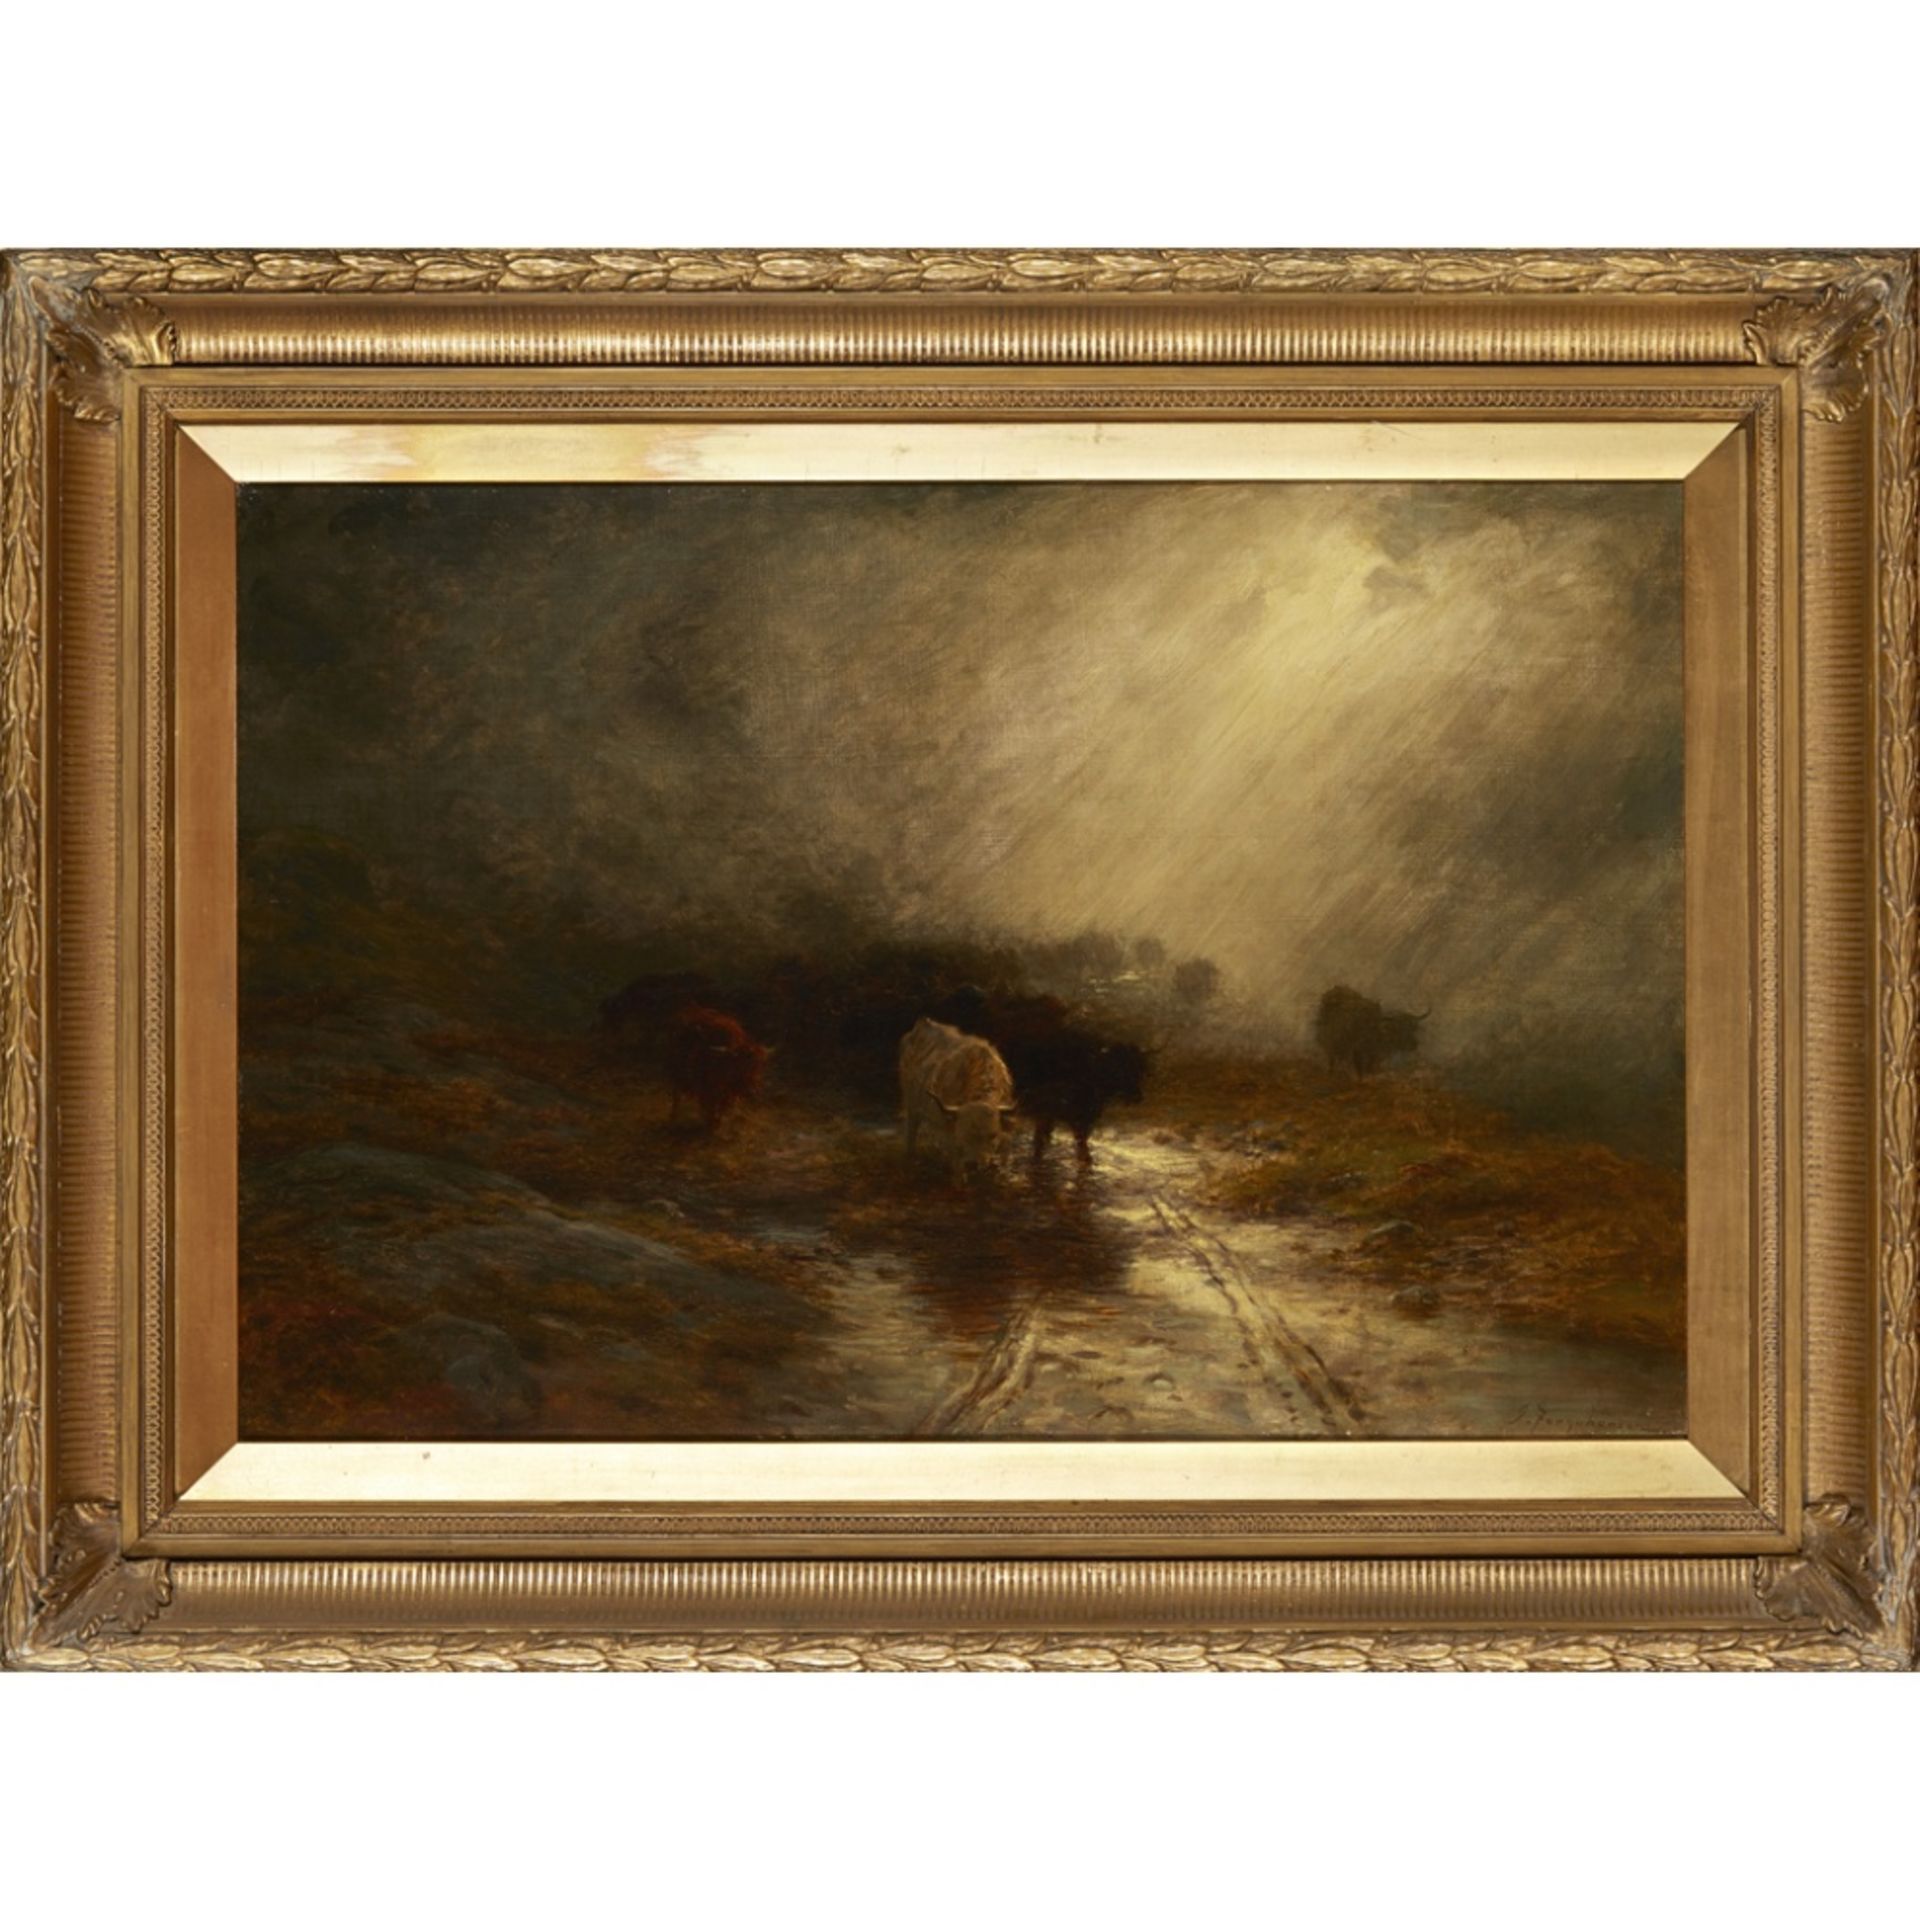 JOSEPH FARQUHARSON R.A. (SCOTTISH 1846-1935)CATTLE IN THE MIST Signed, oil on canvas51cm x 76cm ( - Image 2 of 2